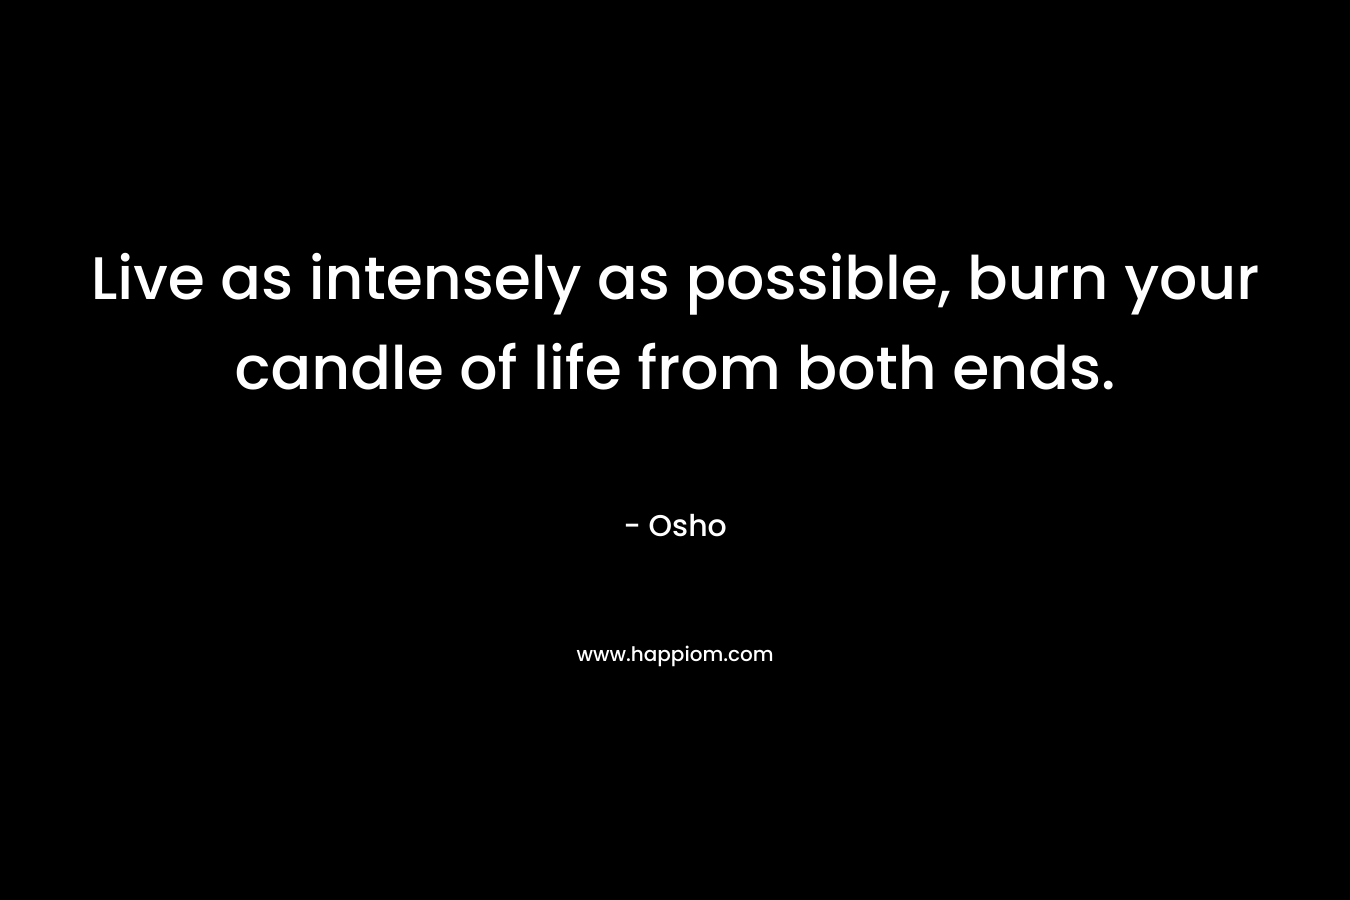 Live as intensely as possible, burn your candle of life from both ends.